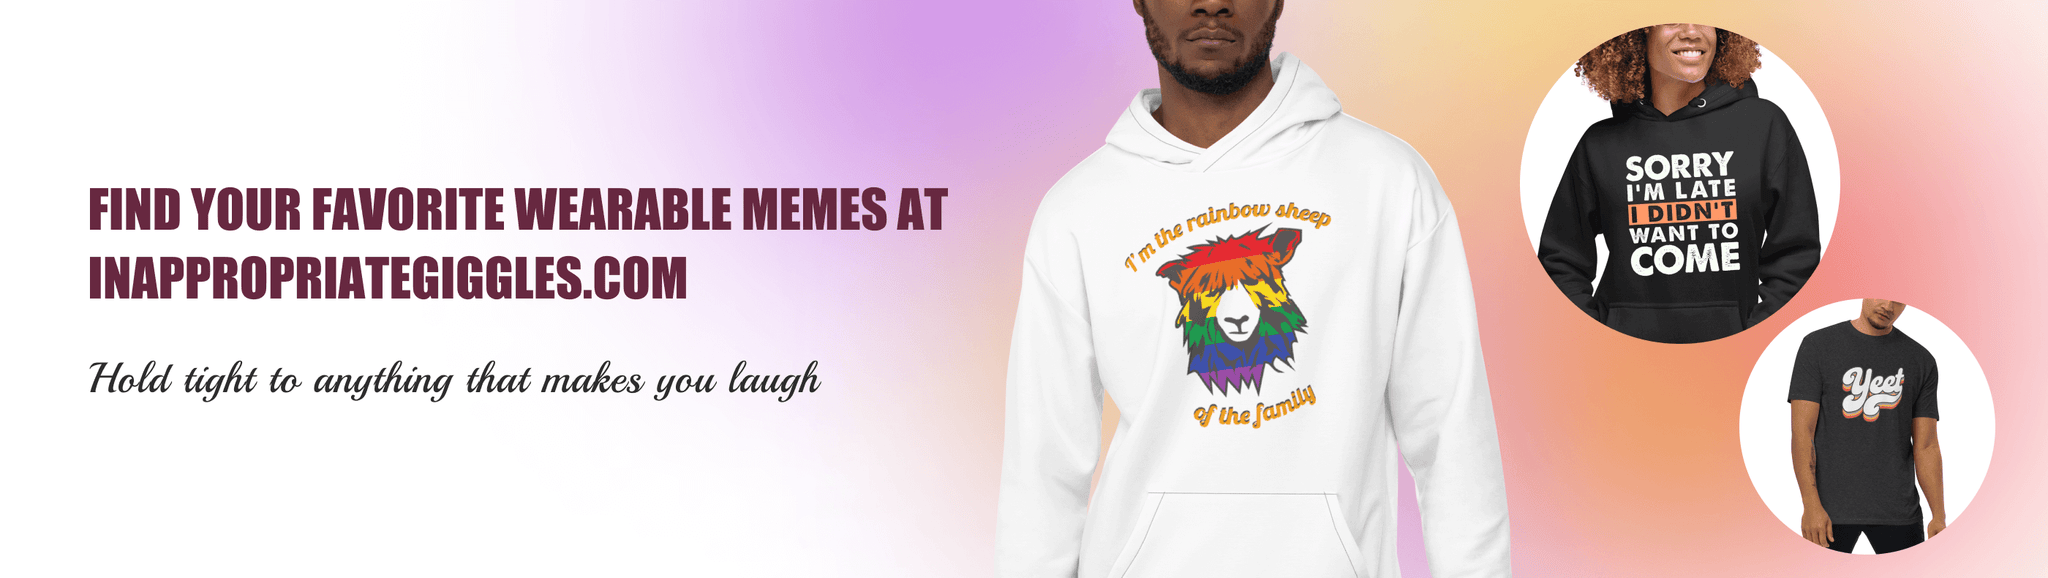 Find your favorite wearable memes at inappropriategiggles.com. Hold tight to anything that makes you laugh. Cropped photos of three people wearing meme t shirts and hoodies from Inappropriate Giggles.